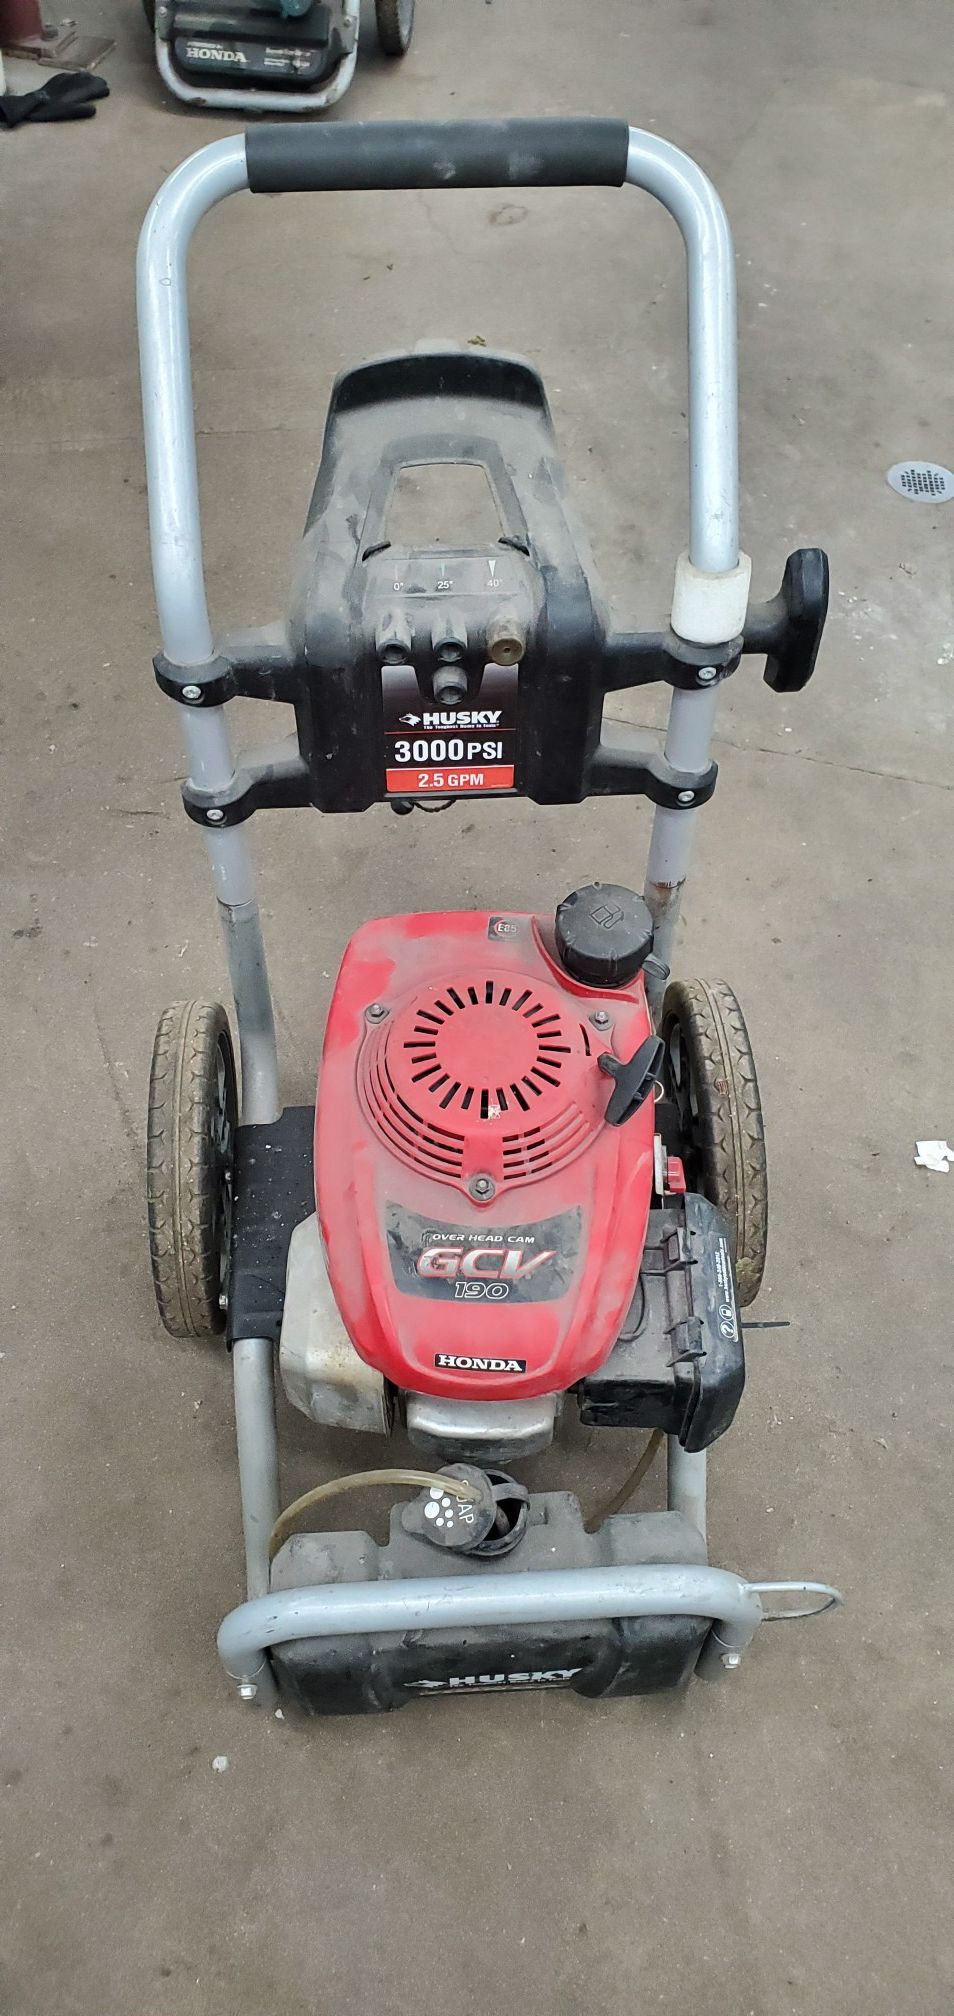 Husky 3000 psi pressure washer, for parts or repair, missing parts